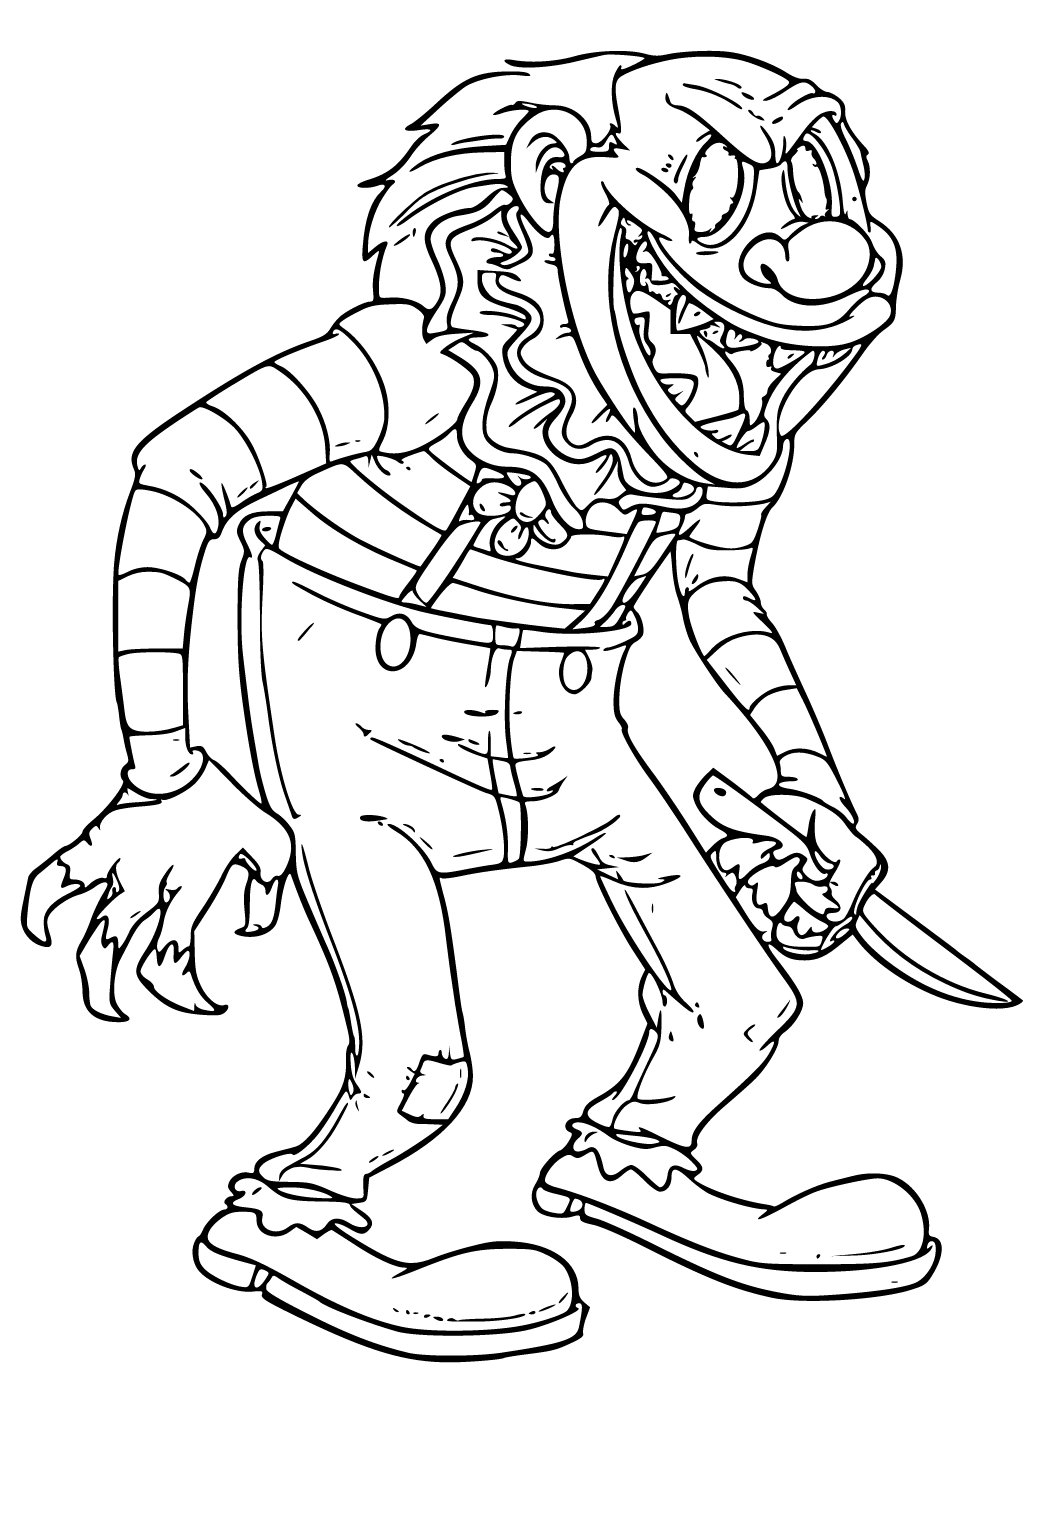 killer clown coloring pages